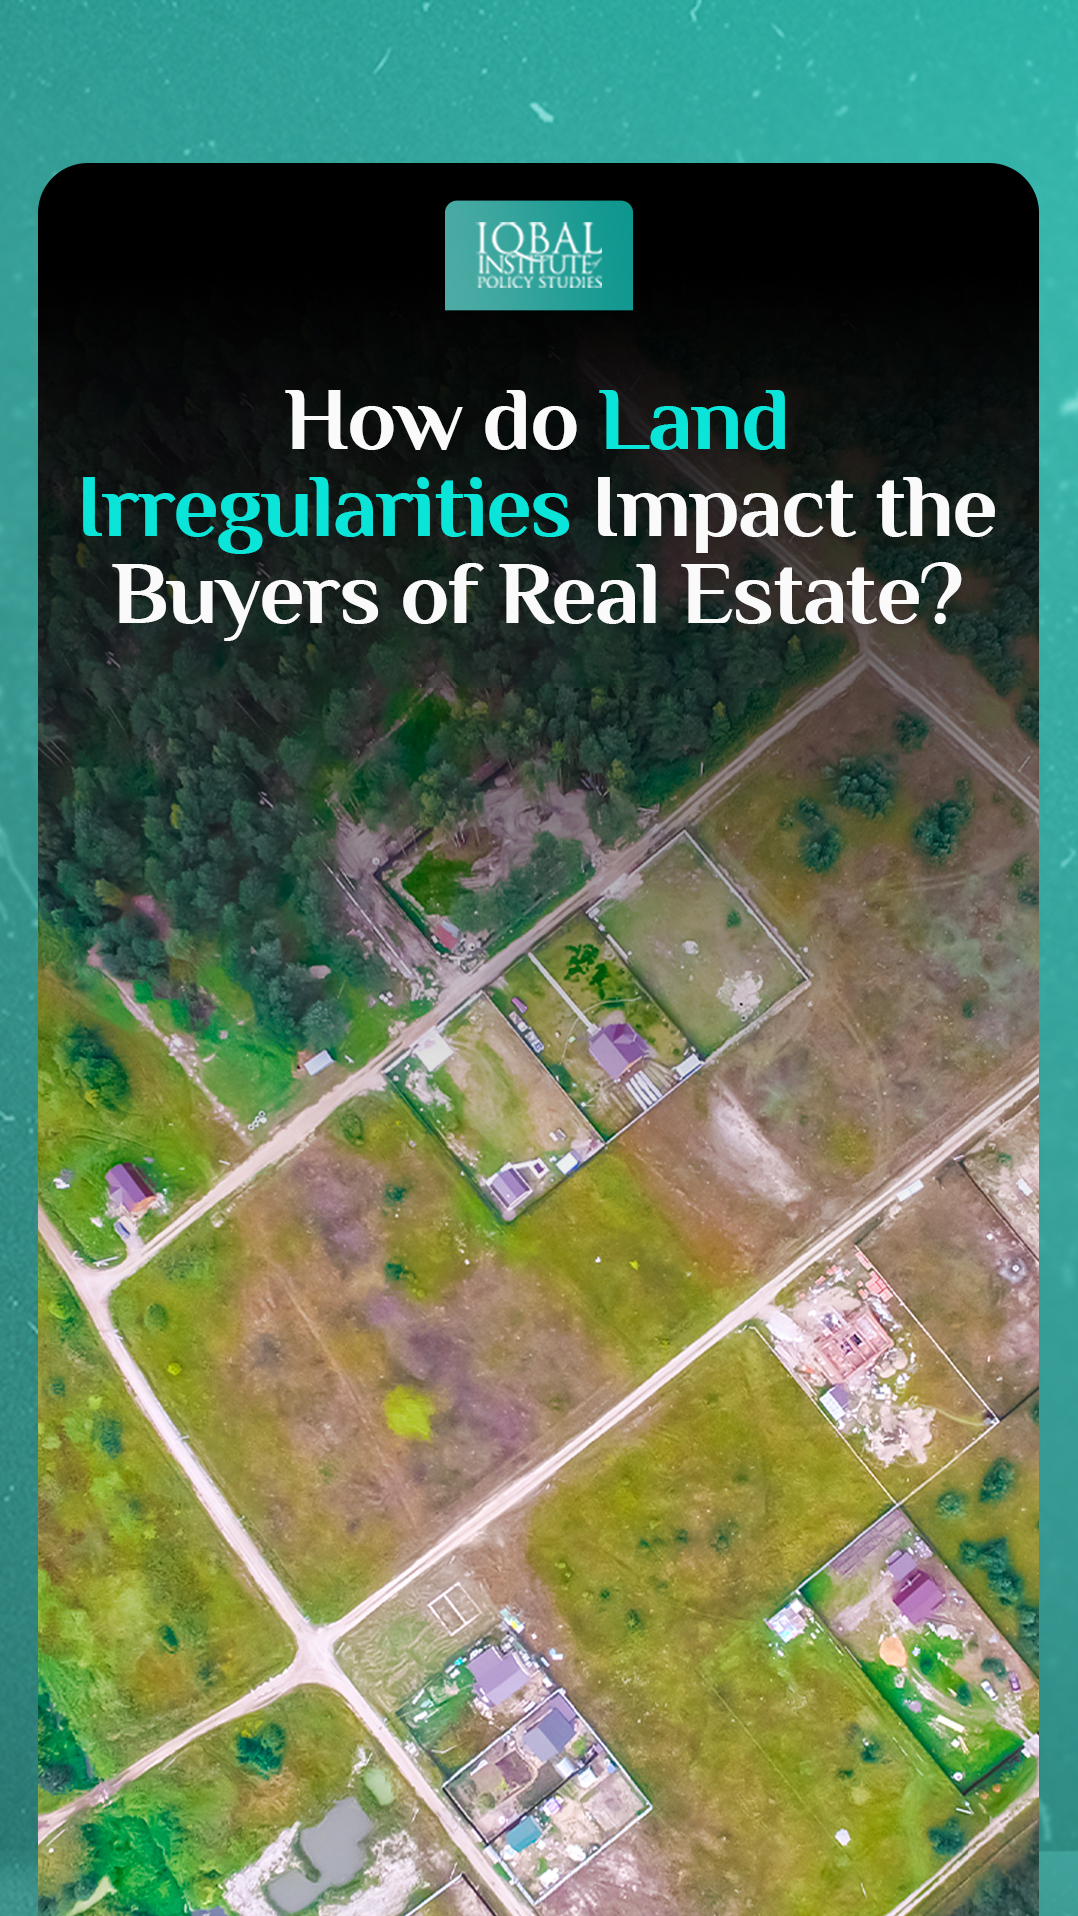 How do Land Irregularities Impact the Buyers of Real Estate?